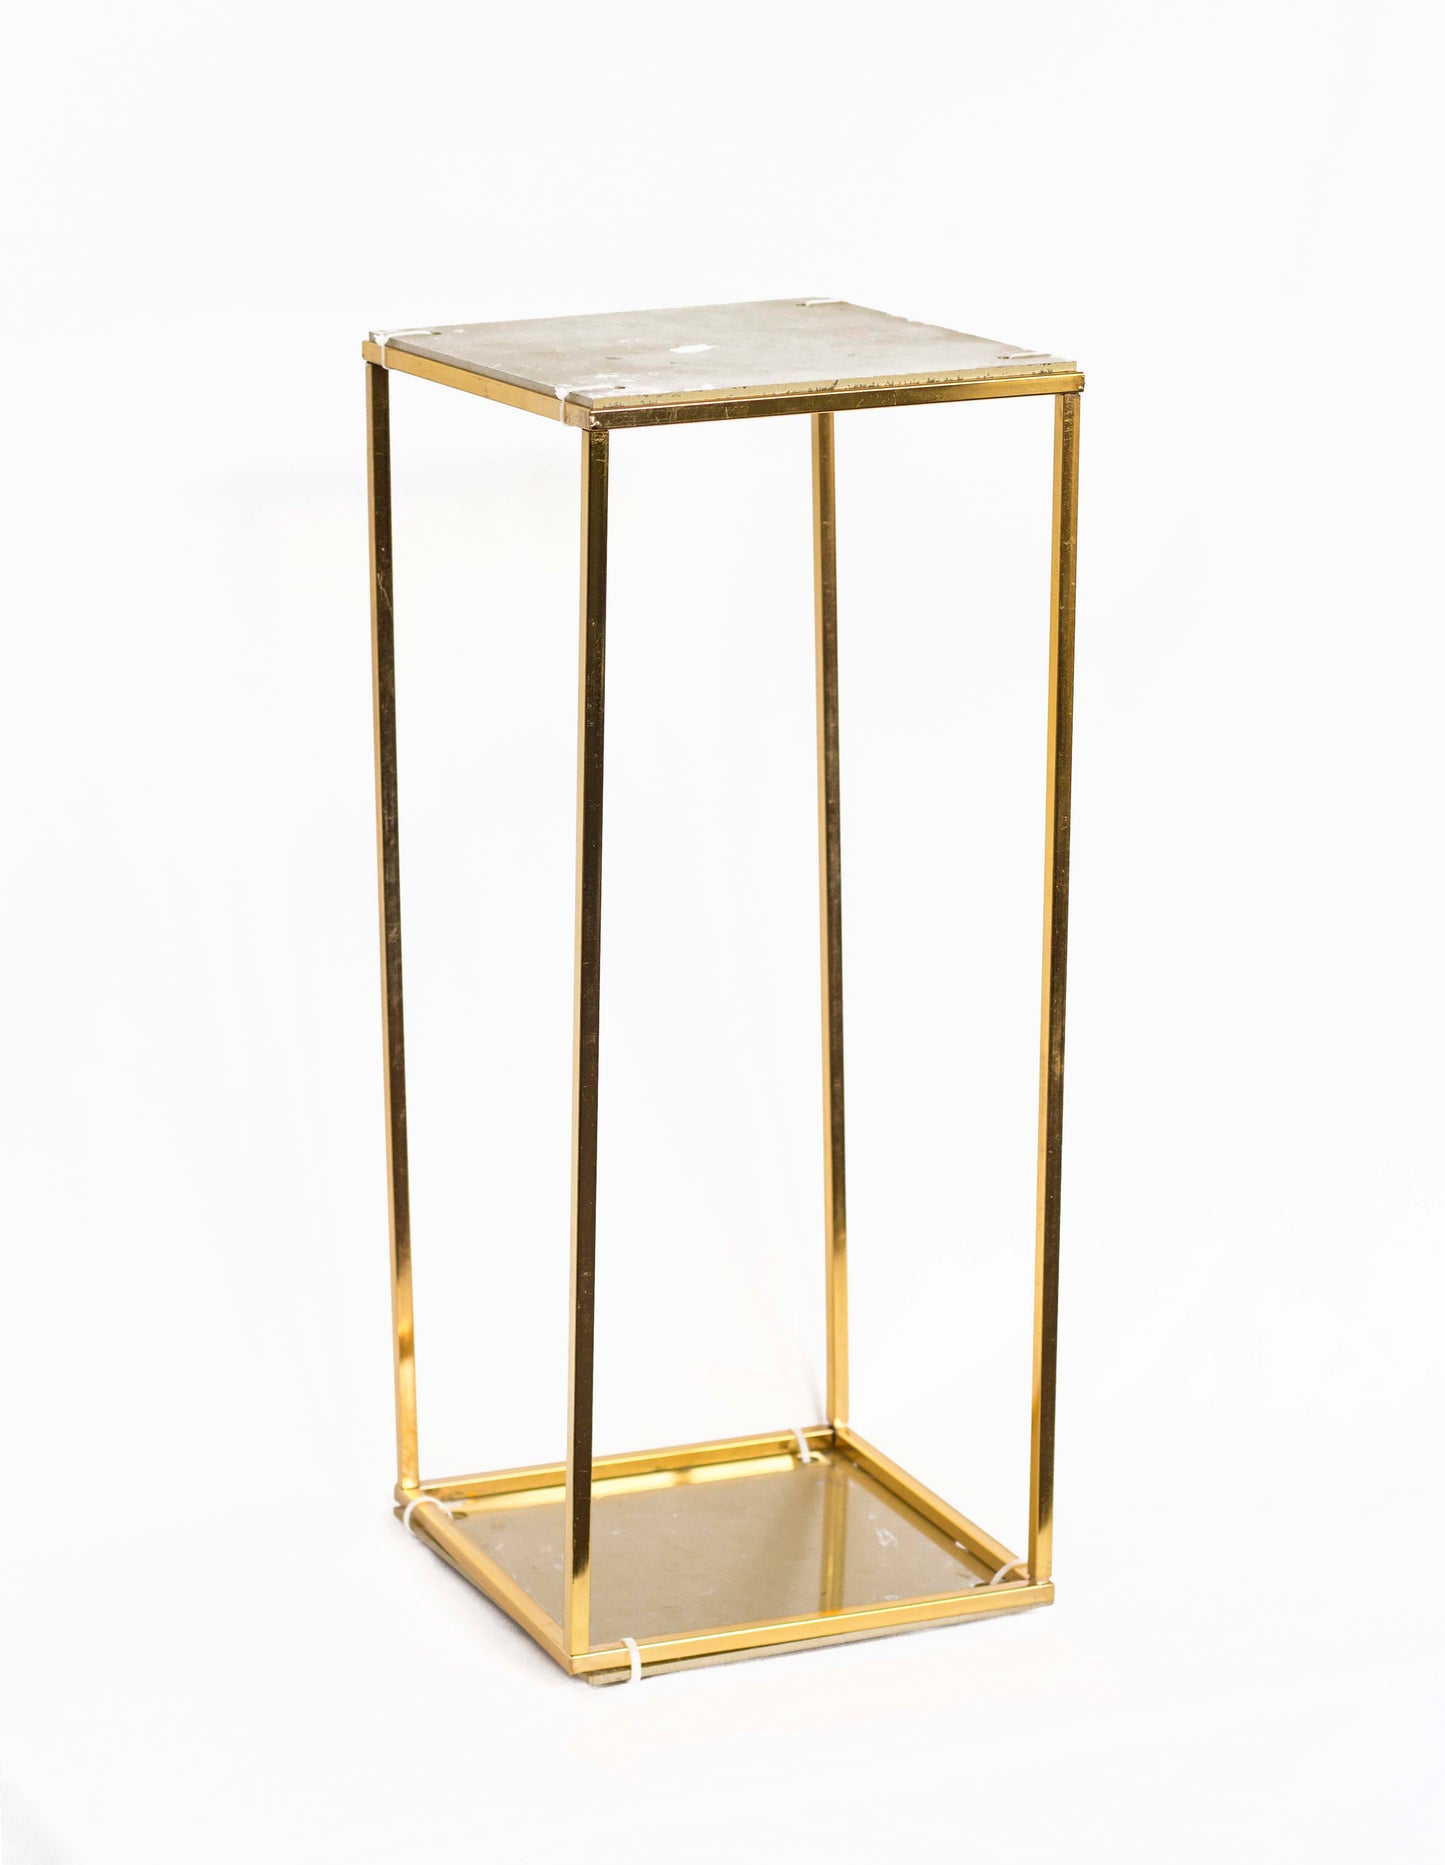 Gold-colored small stand for flower arrangements